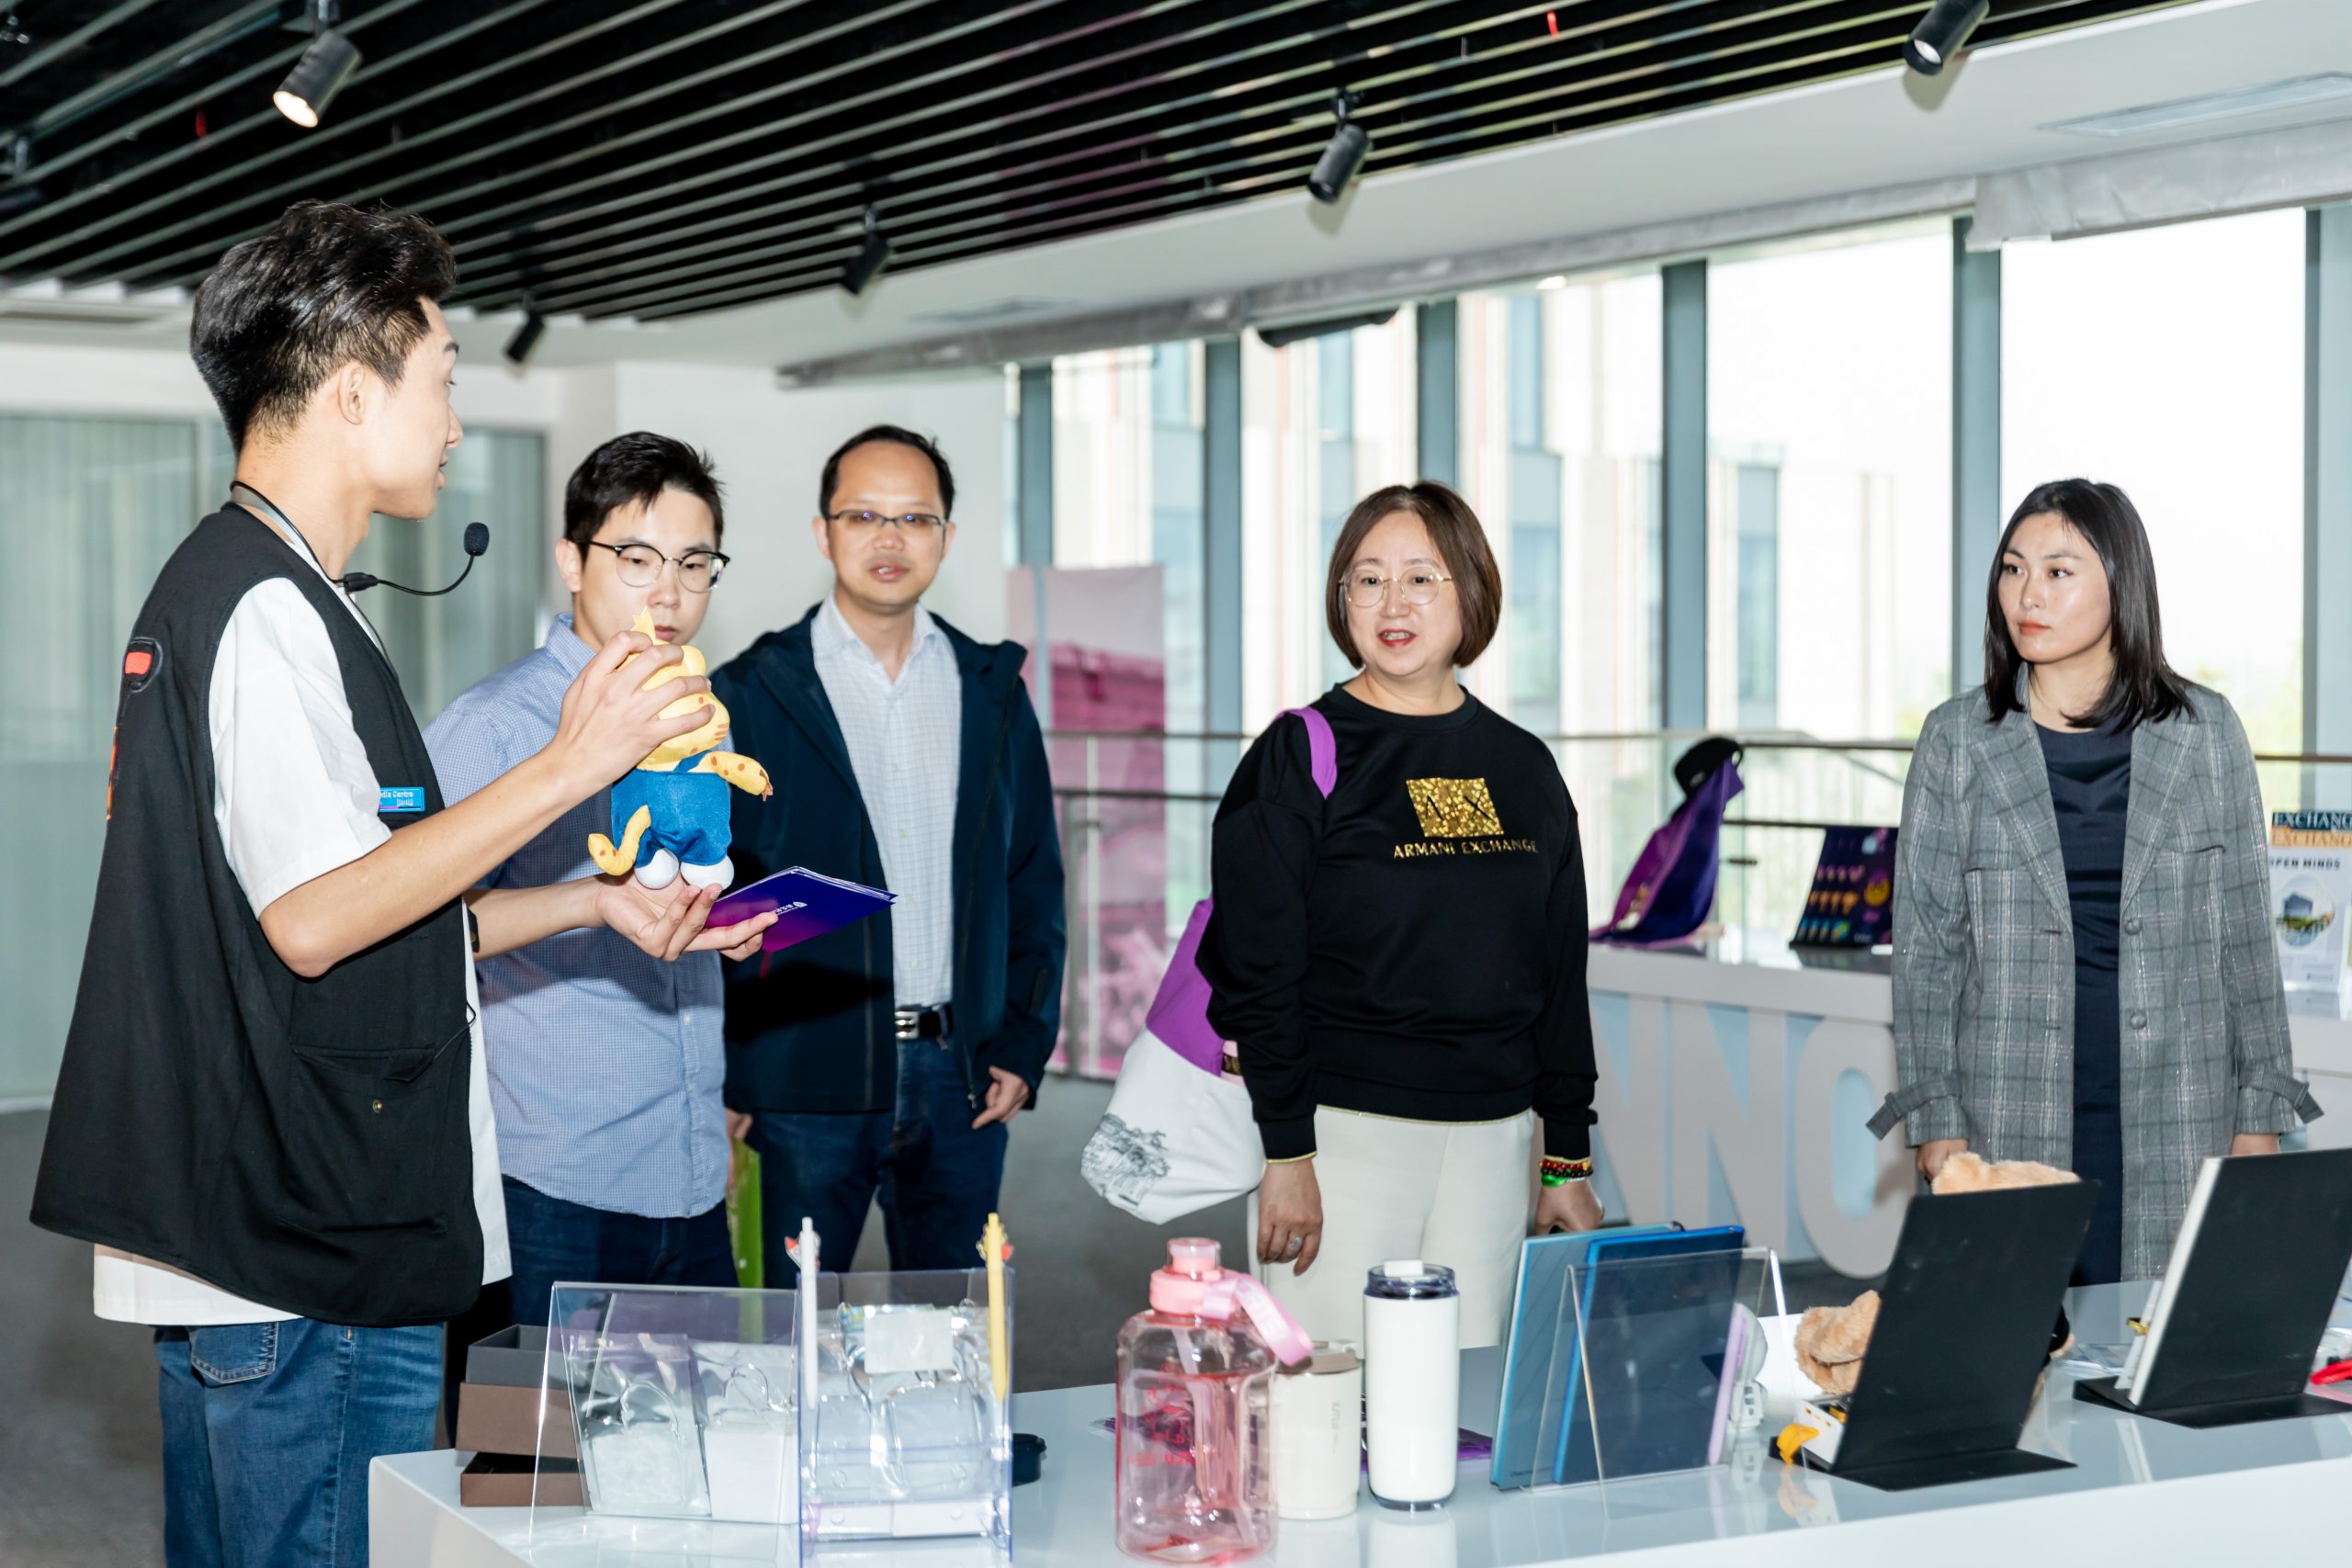 XJTLU Multimedia Centre connects with community